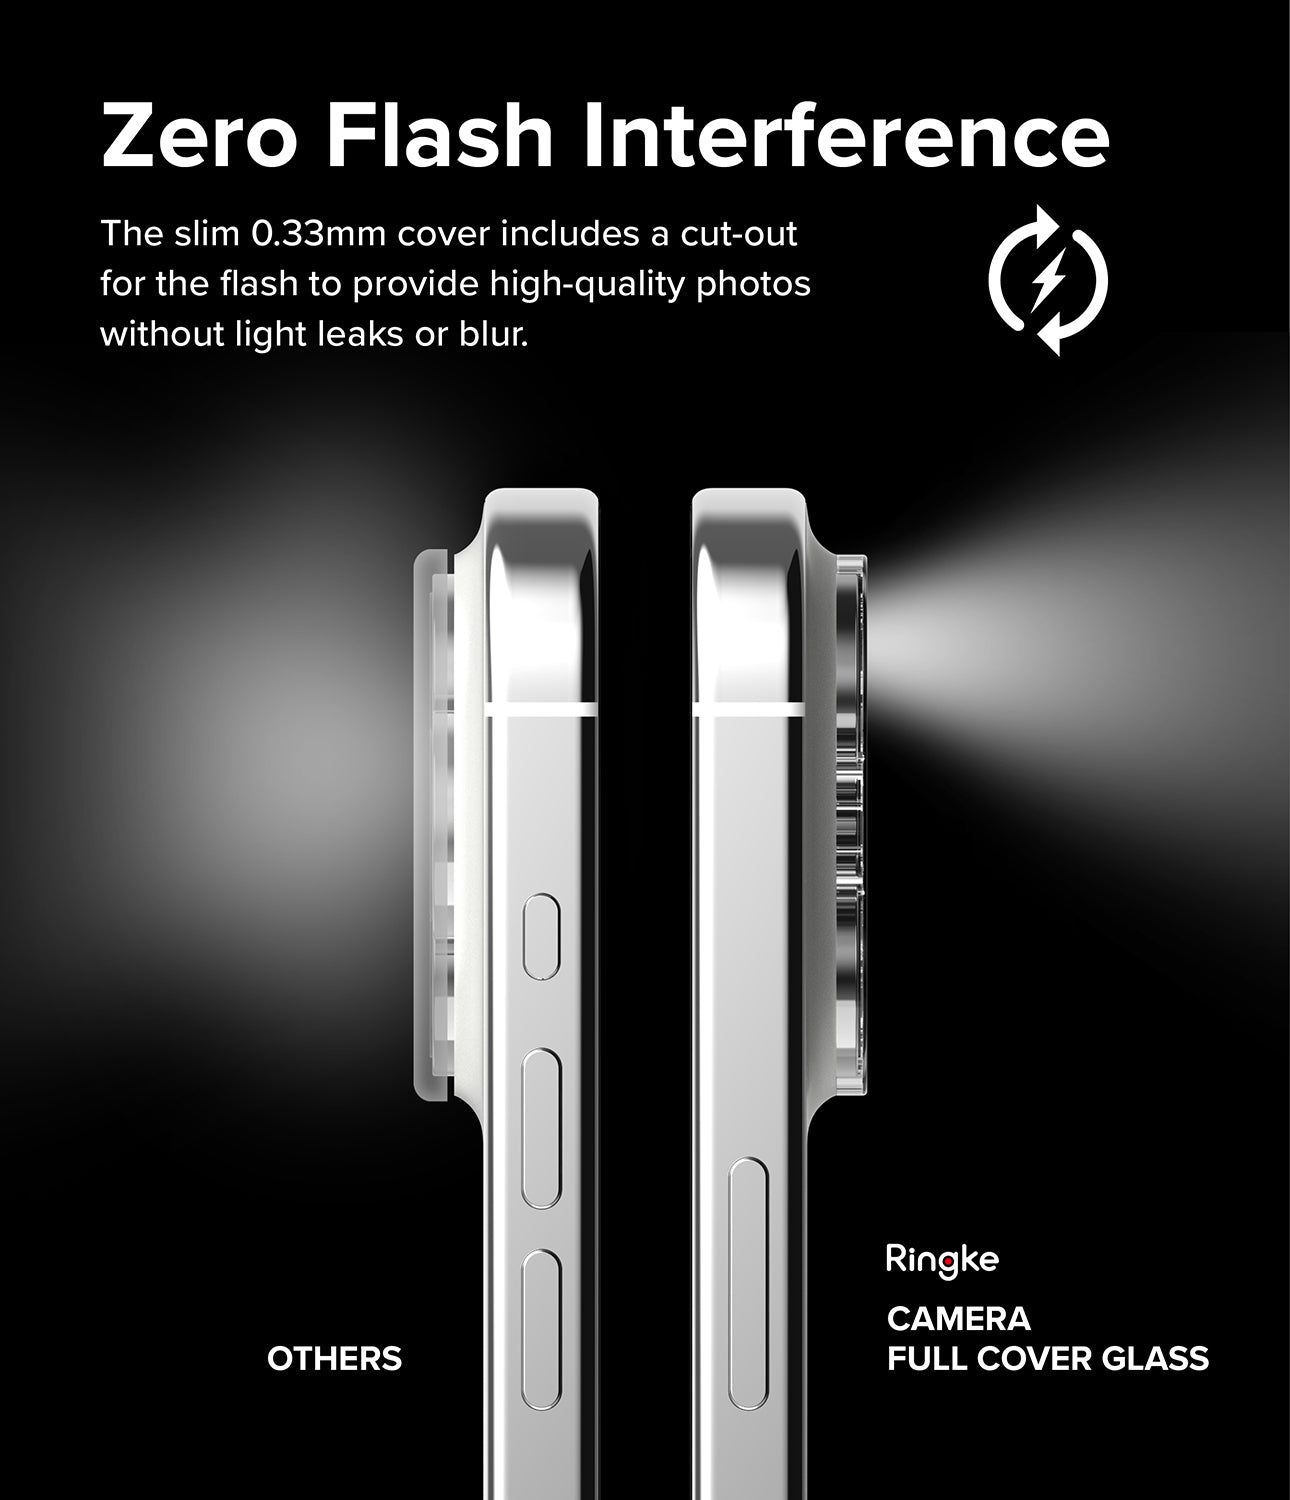 iPhone 15 Pro | Camera Protector Glass [2 Pack]- Zero Flash Interference. The slim 0.33mm cover includes a cut-out for the flash to provide high-quality photos without light leaks or blur.